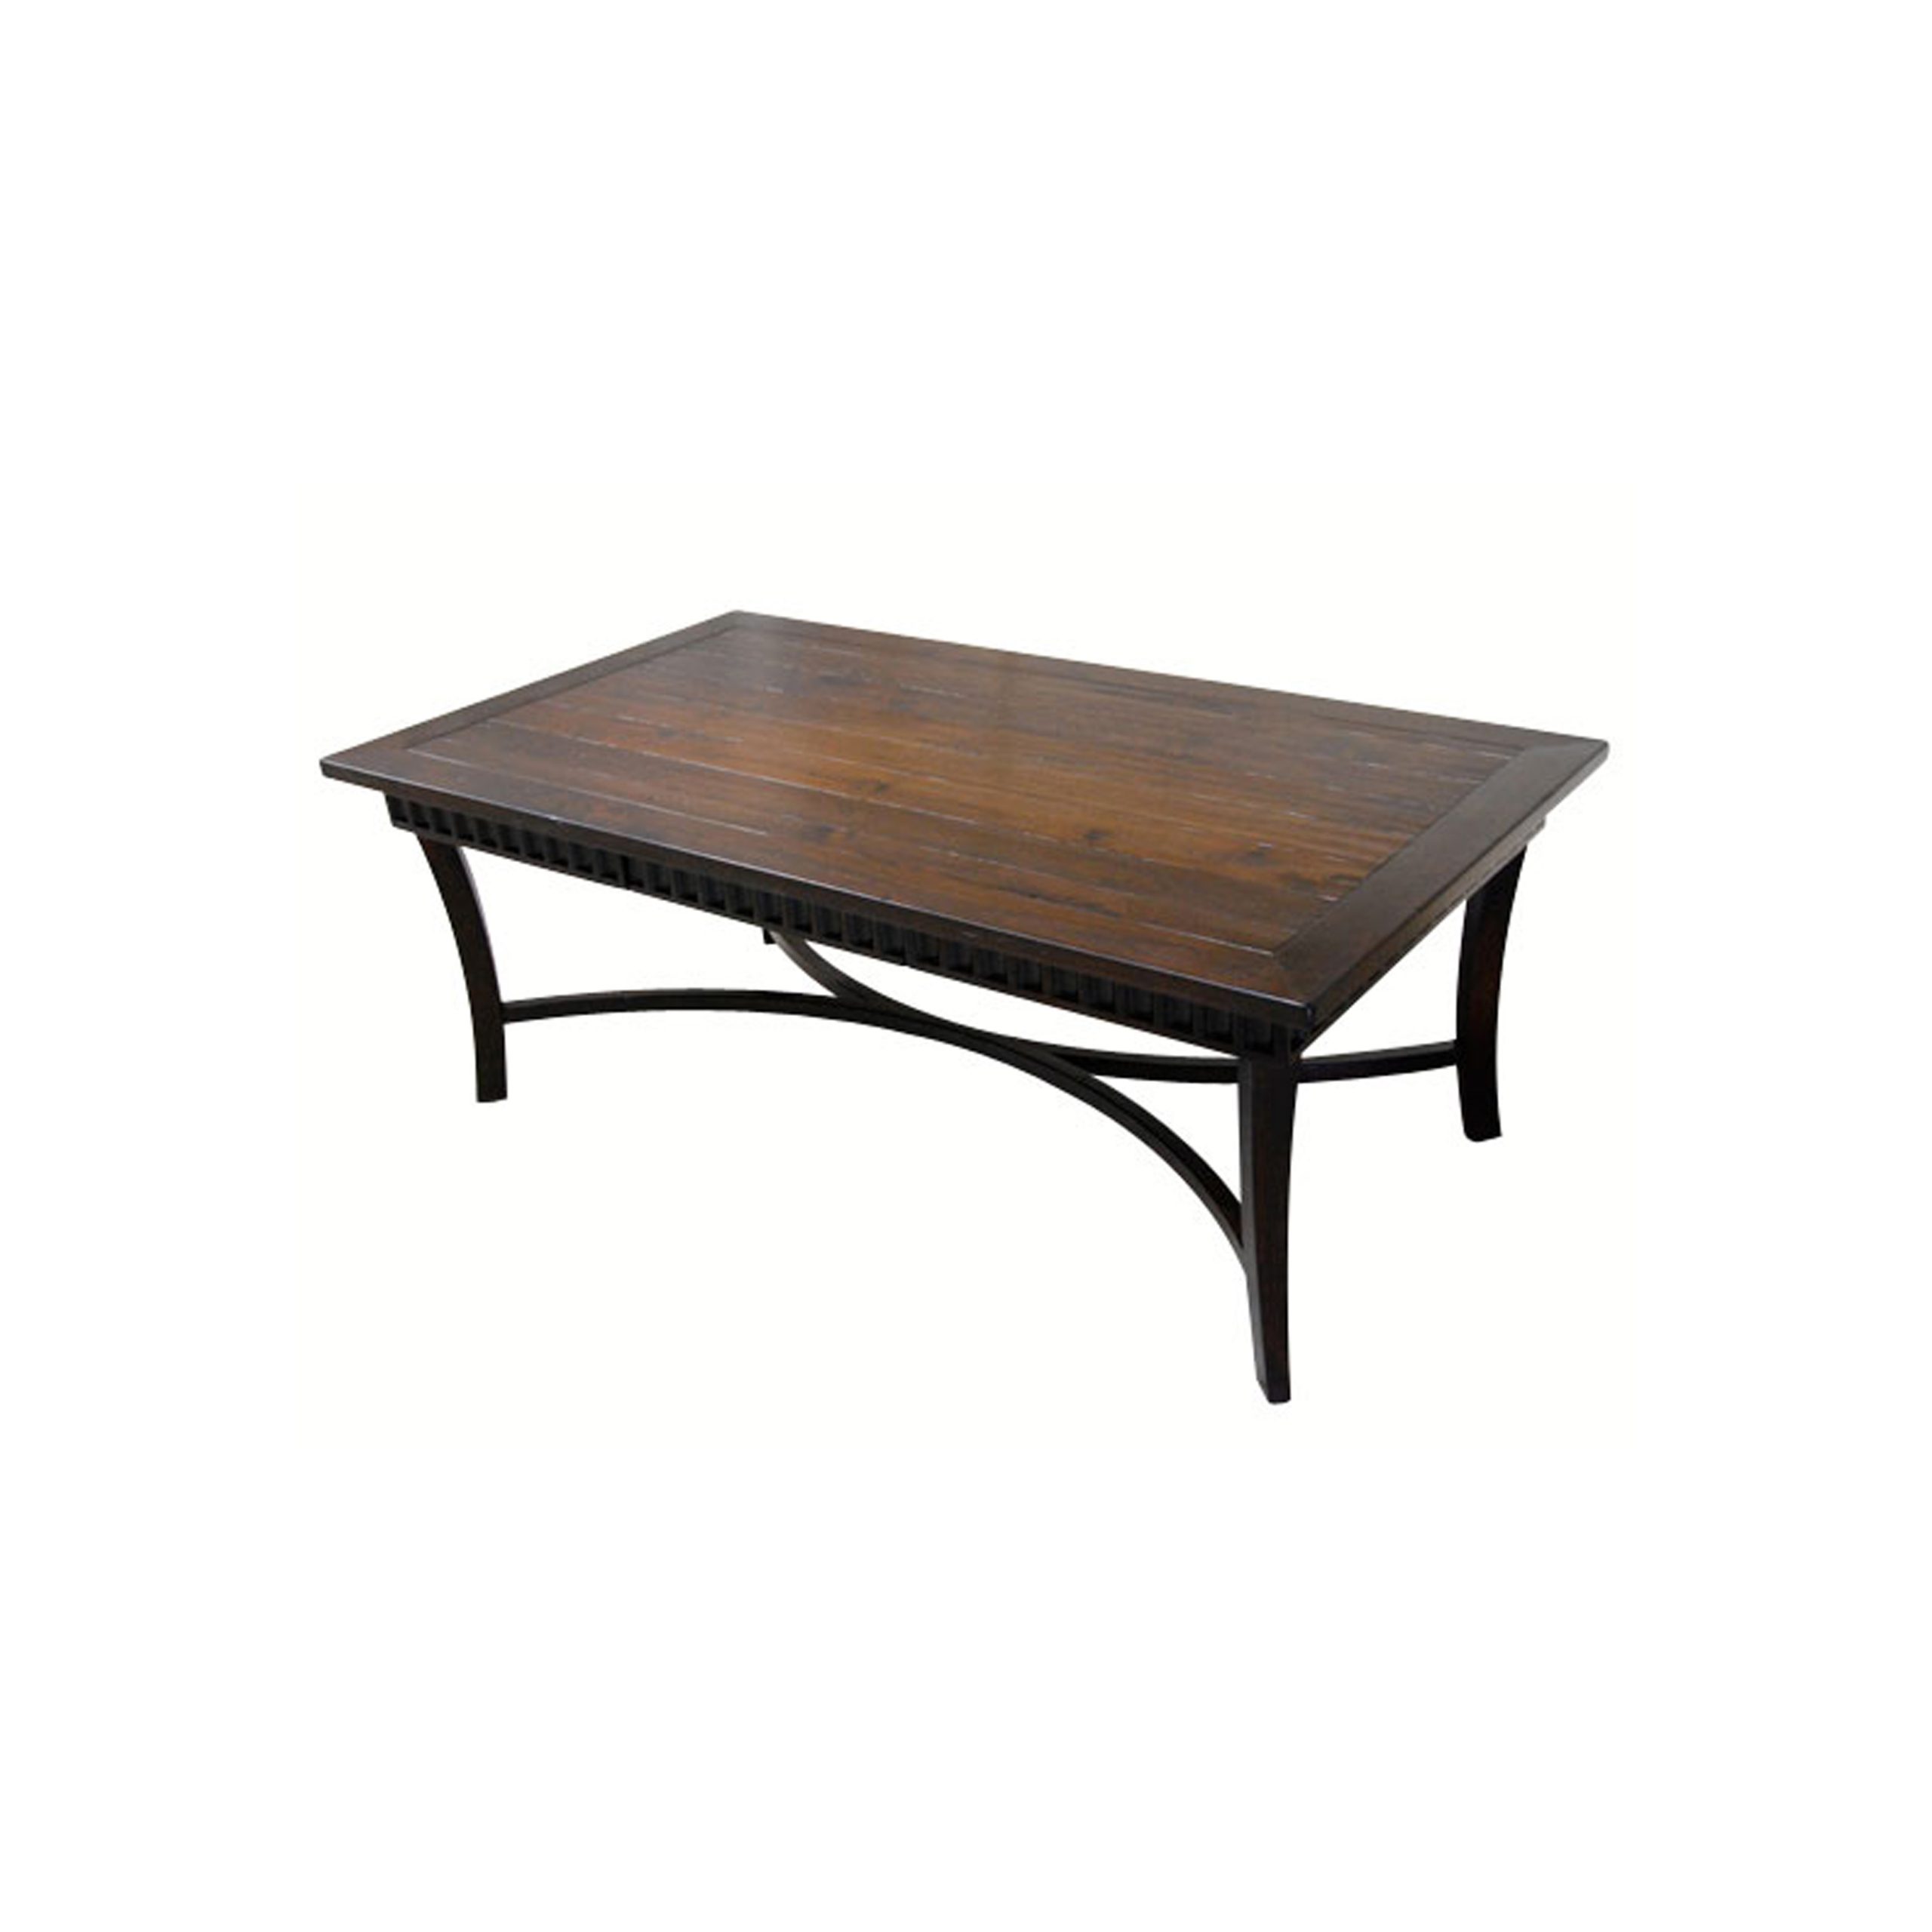 BW3168 Classic Curved Stretcher Coffee/Cocktail Table with dental molding 40w x 24d x 18″h. Shown in Alder with a custom finish.